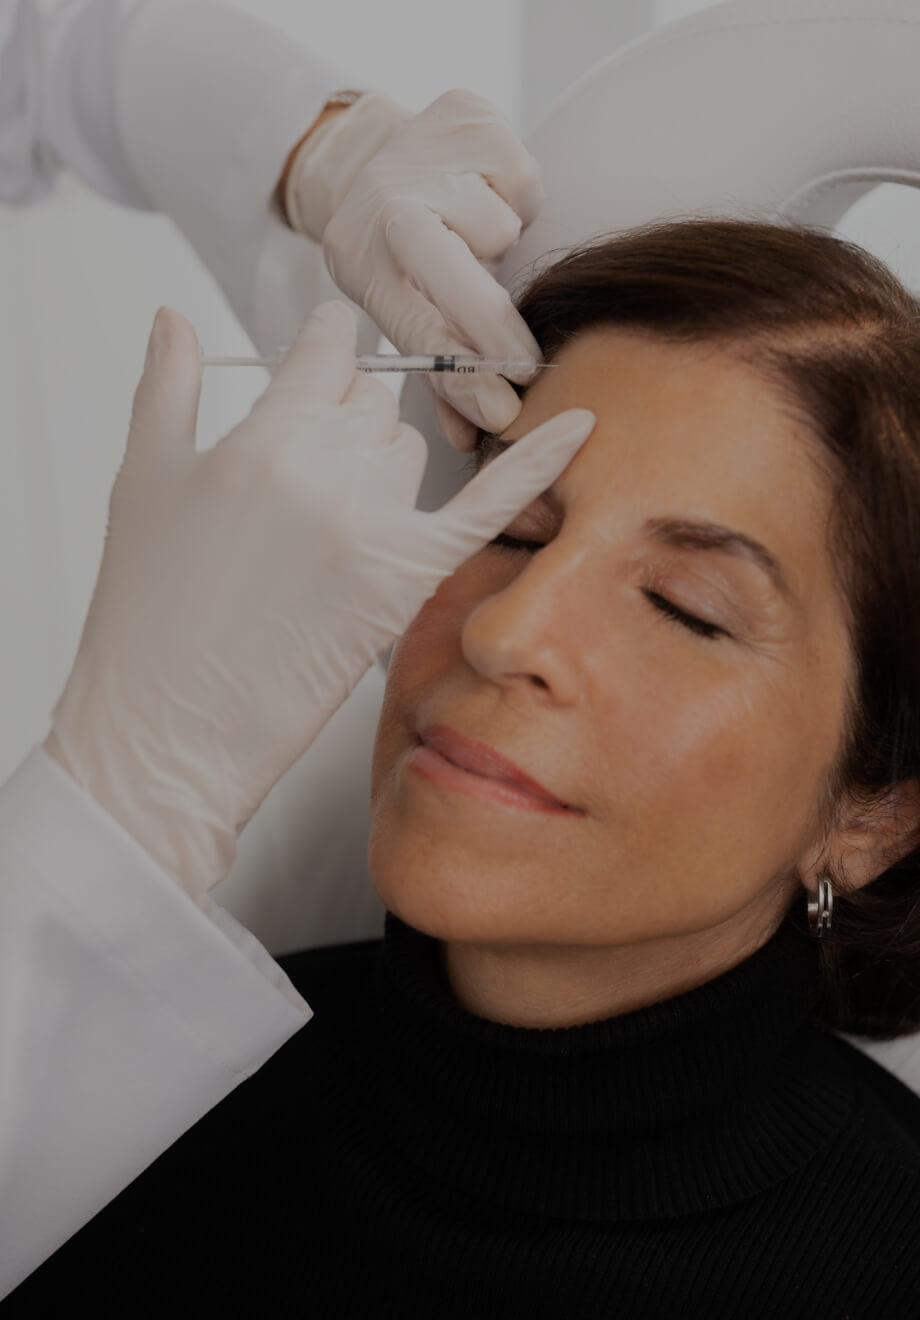 A doctor from Clinique Chloé performing neuromodulator injections into a patient's forehead